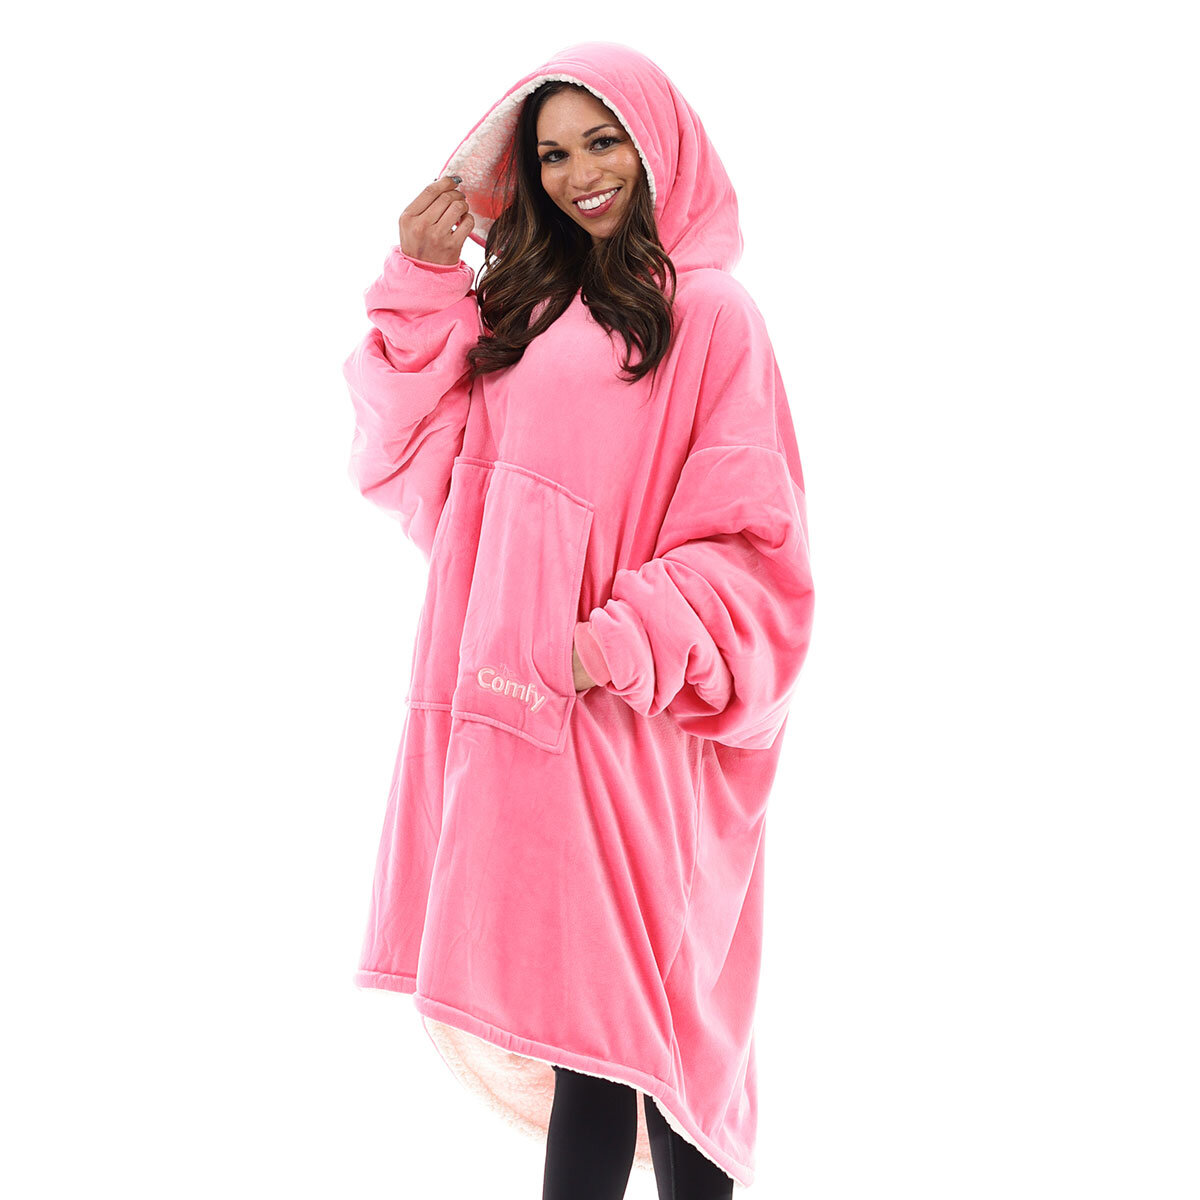 The Comfy® Original™ - The Blanket You Can Wear!  Comfy outfits, Christmas  wishlist, Wearable blanket